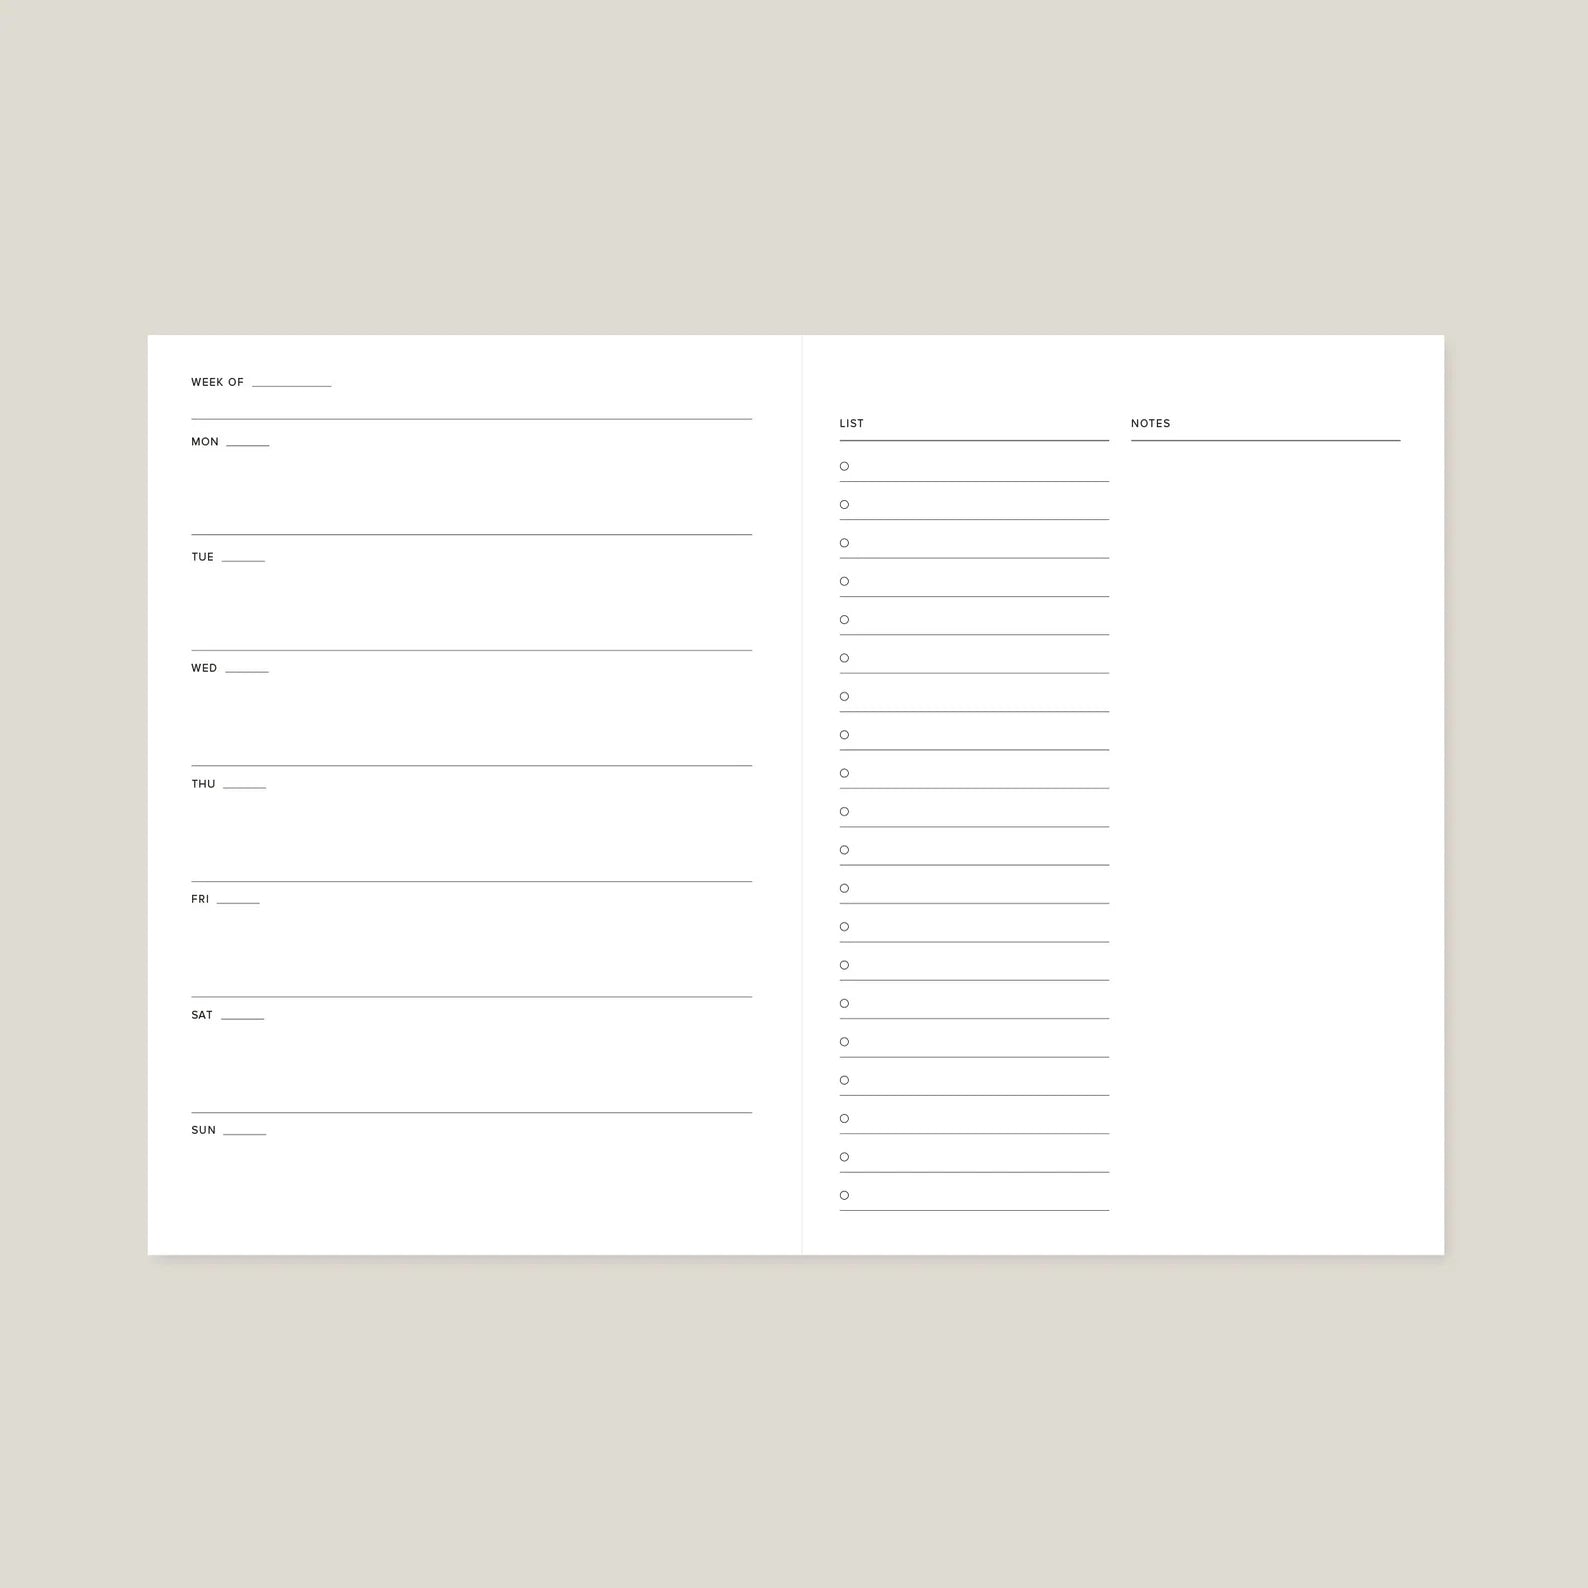 Weekly Planner, A5, Undated in Abstract Black & Cream